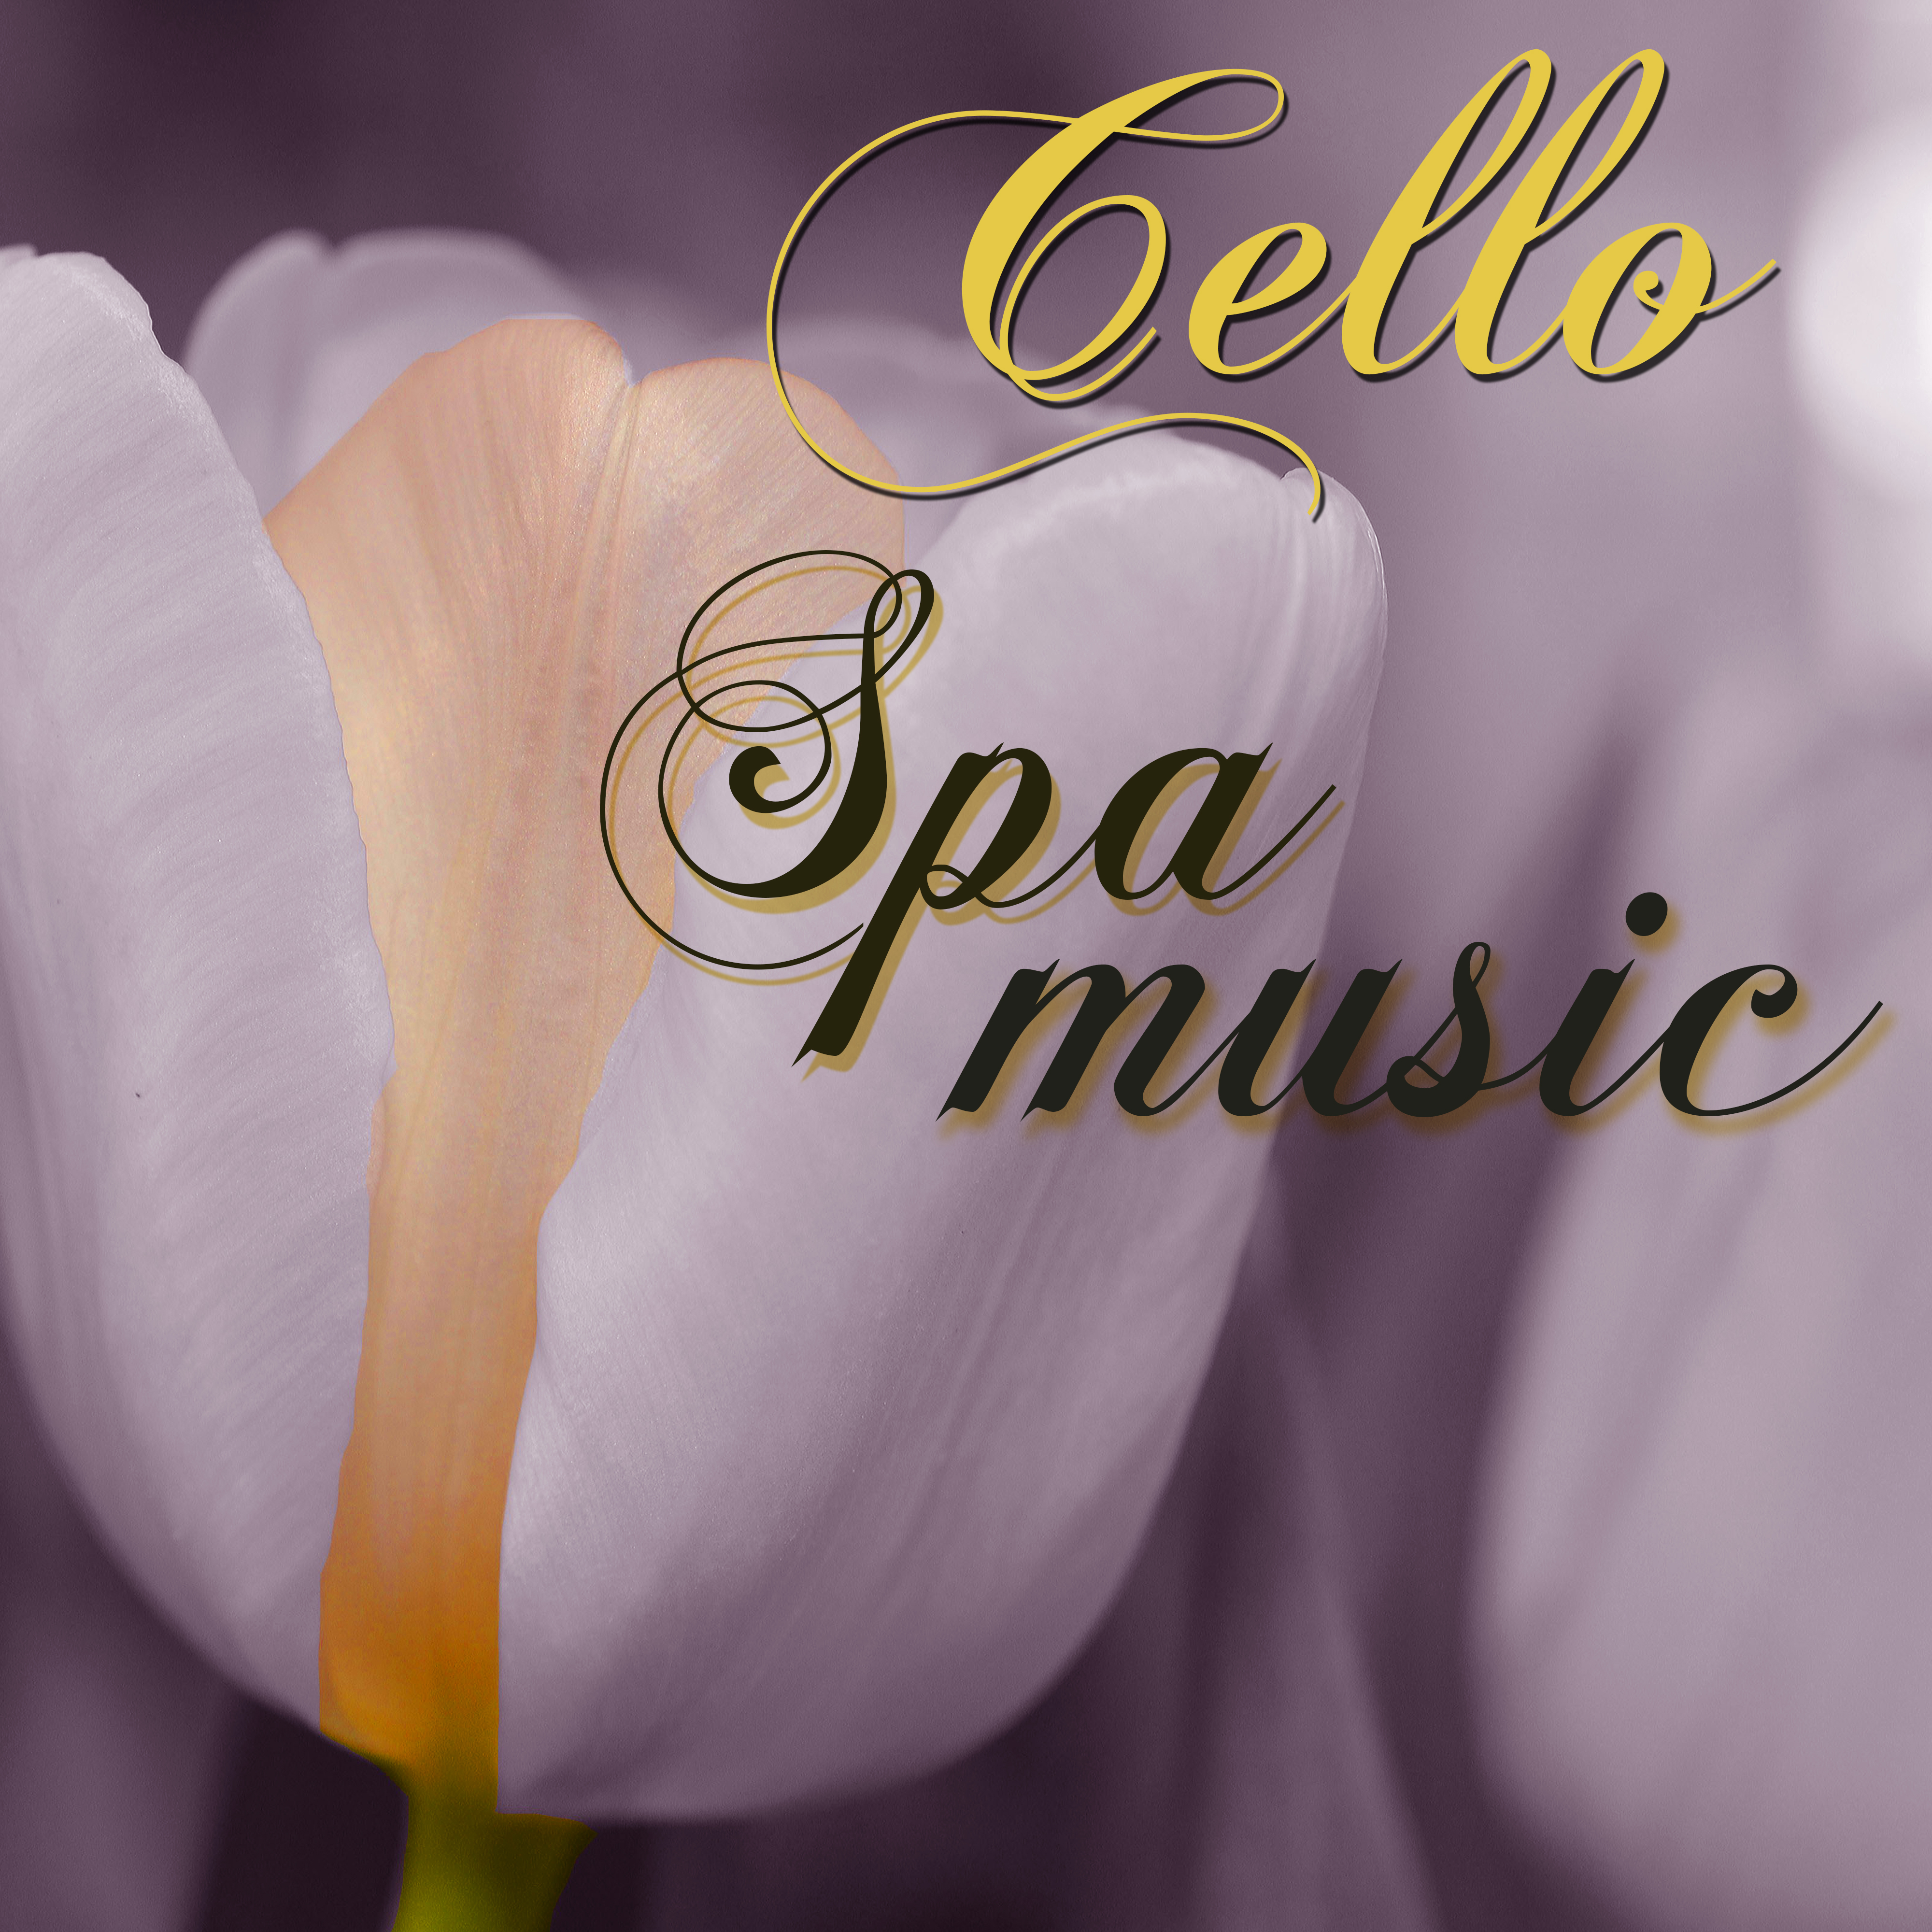 Cello Spa Music – Soothing Spa Sounds for Massage & Healthy Body Wellness Center